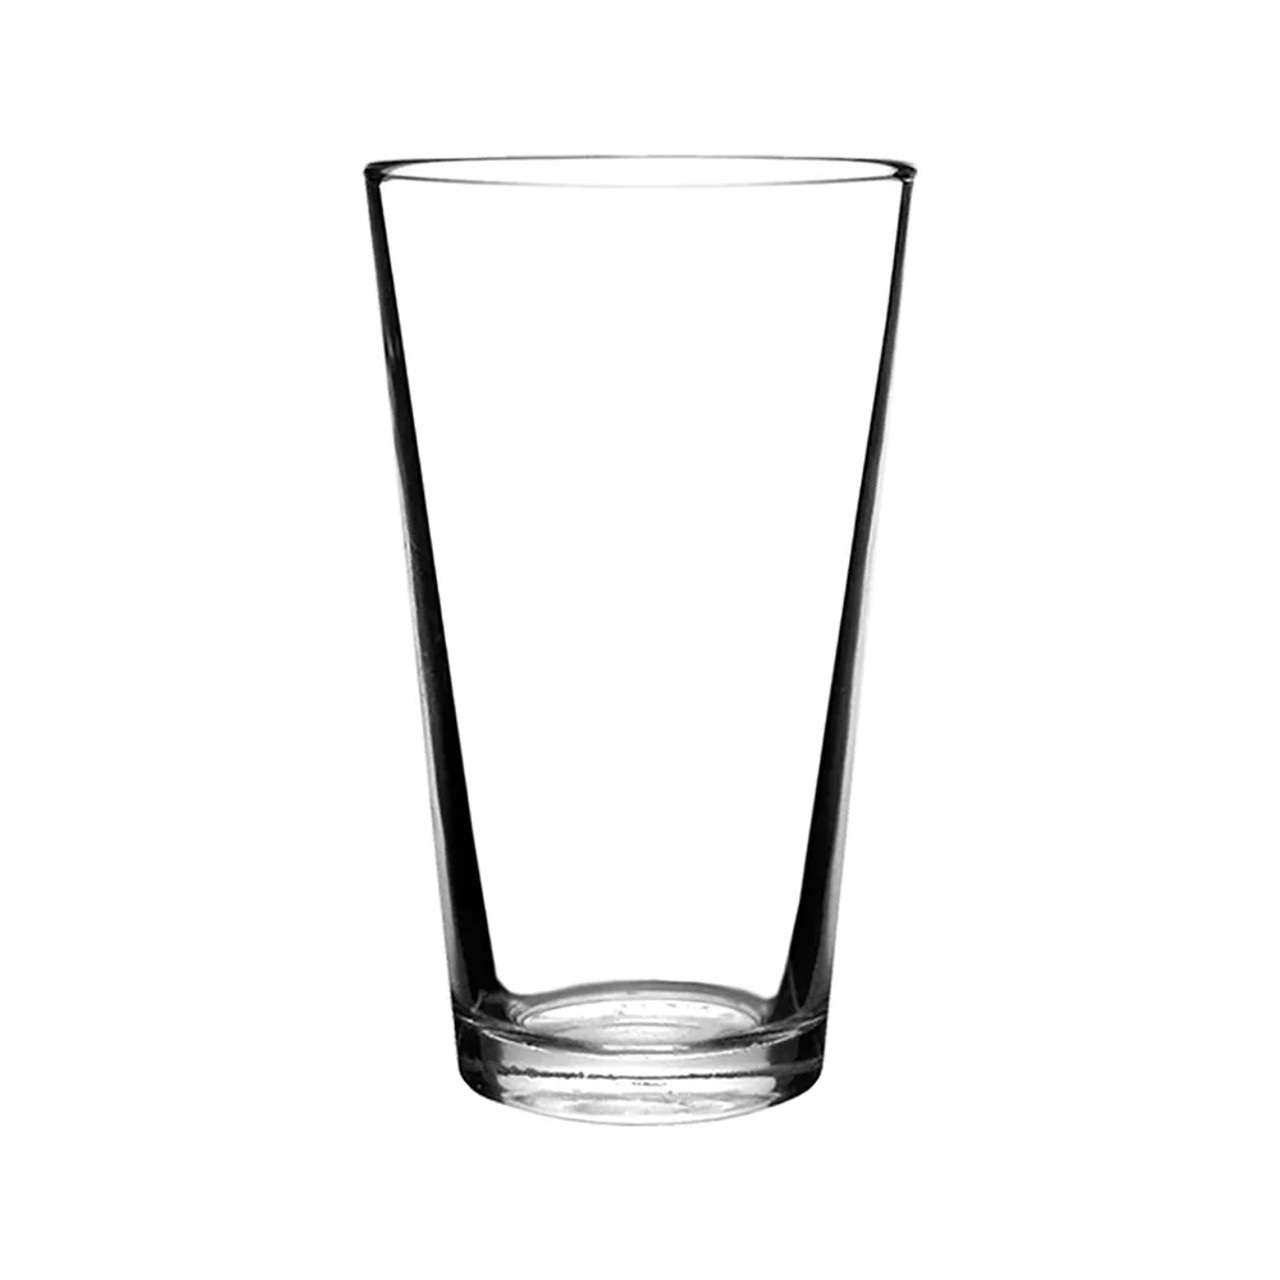 ITI 8639RT 16 oz Rim-Tempered Mixing Glass (24/Case) - Versatile for Cocktails - Chicken Pieces